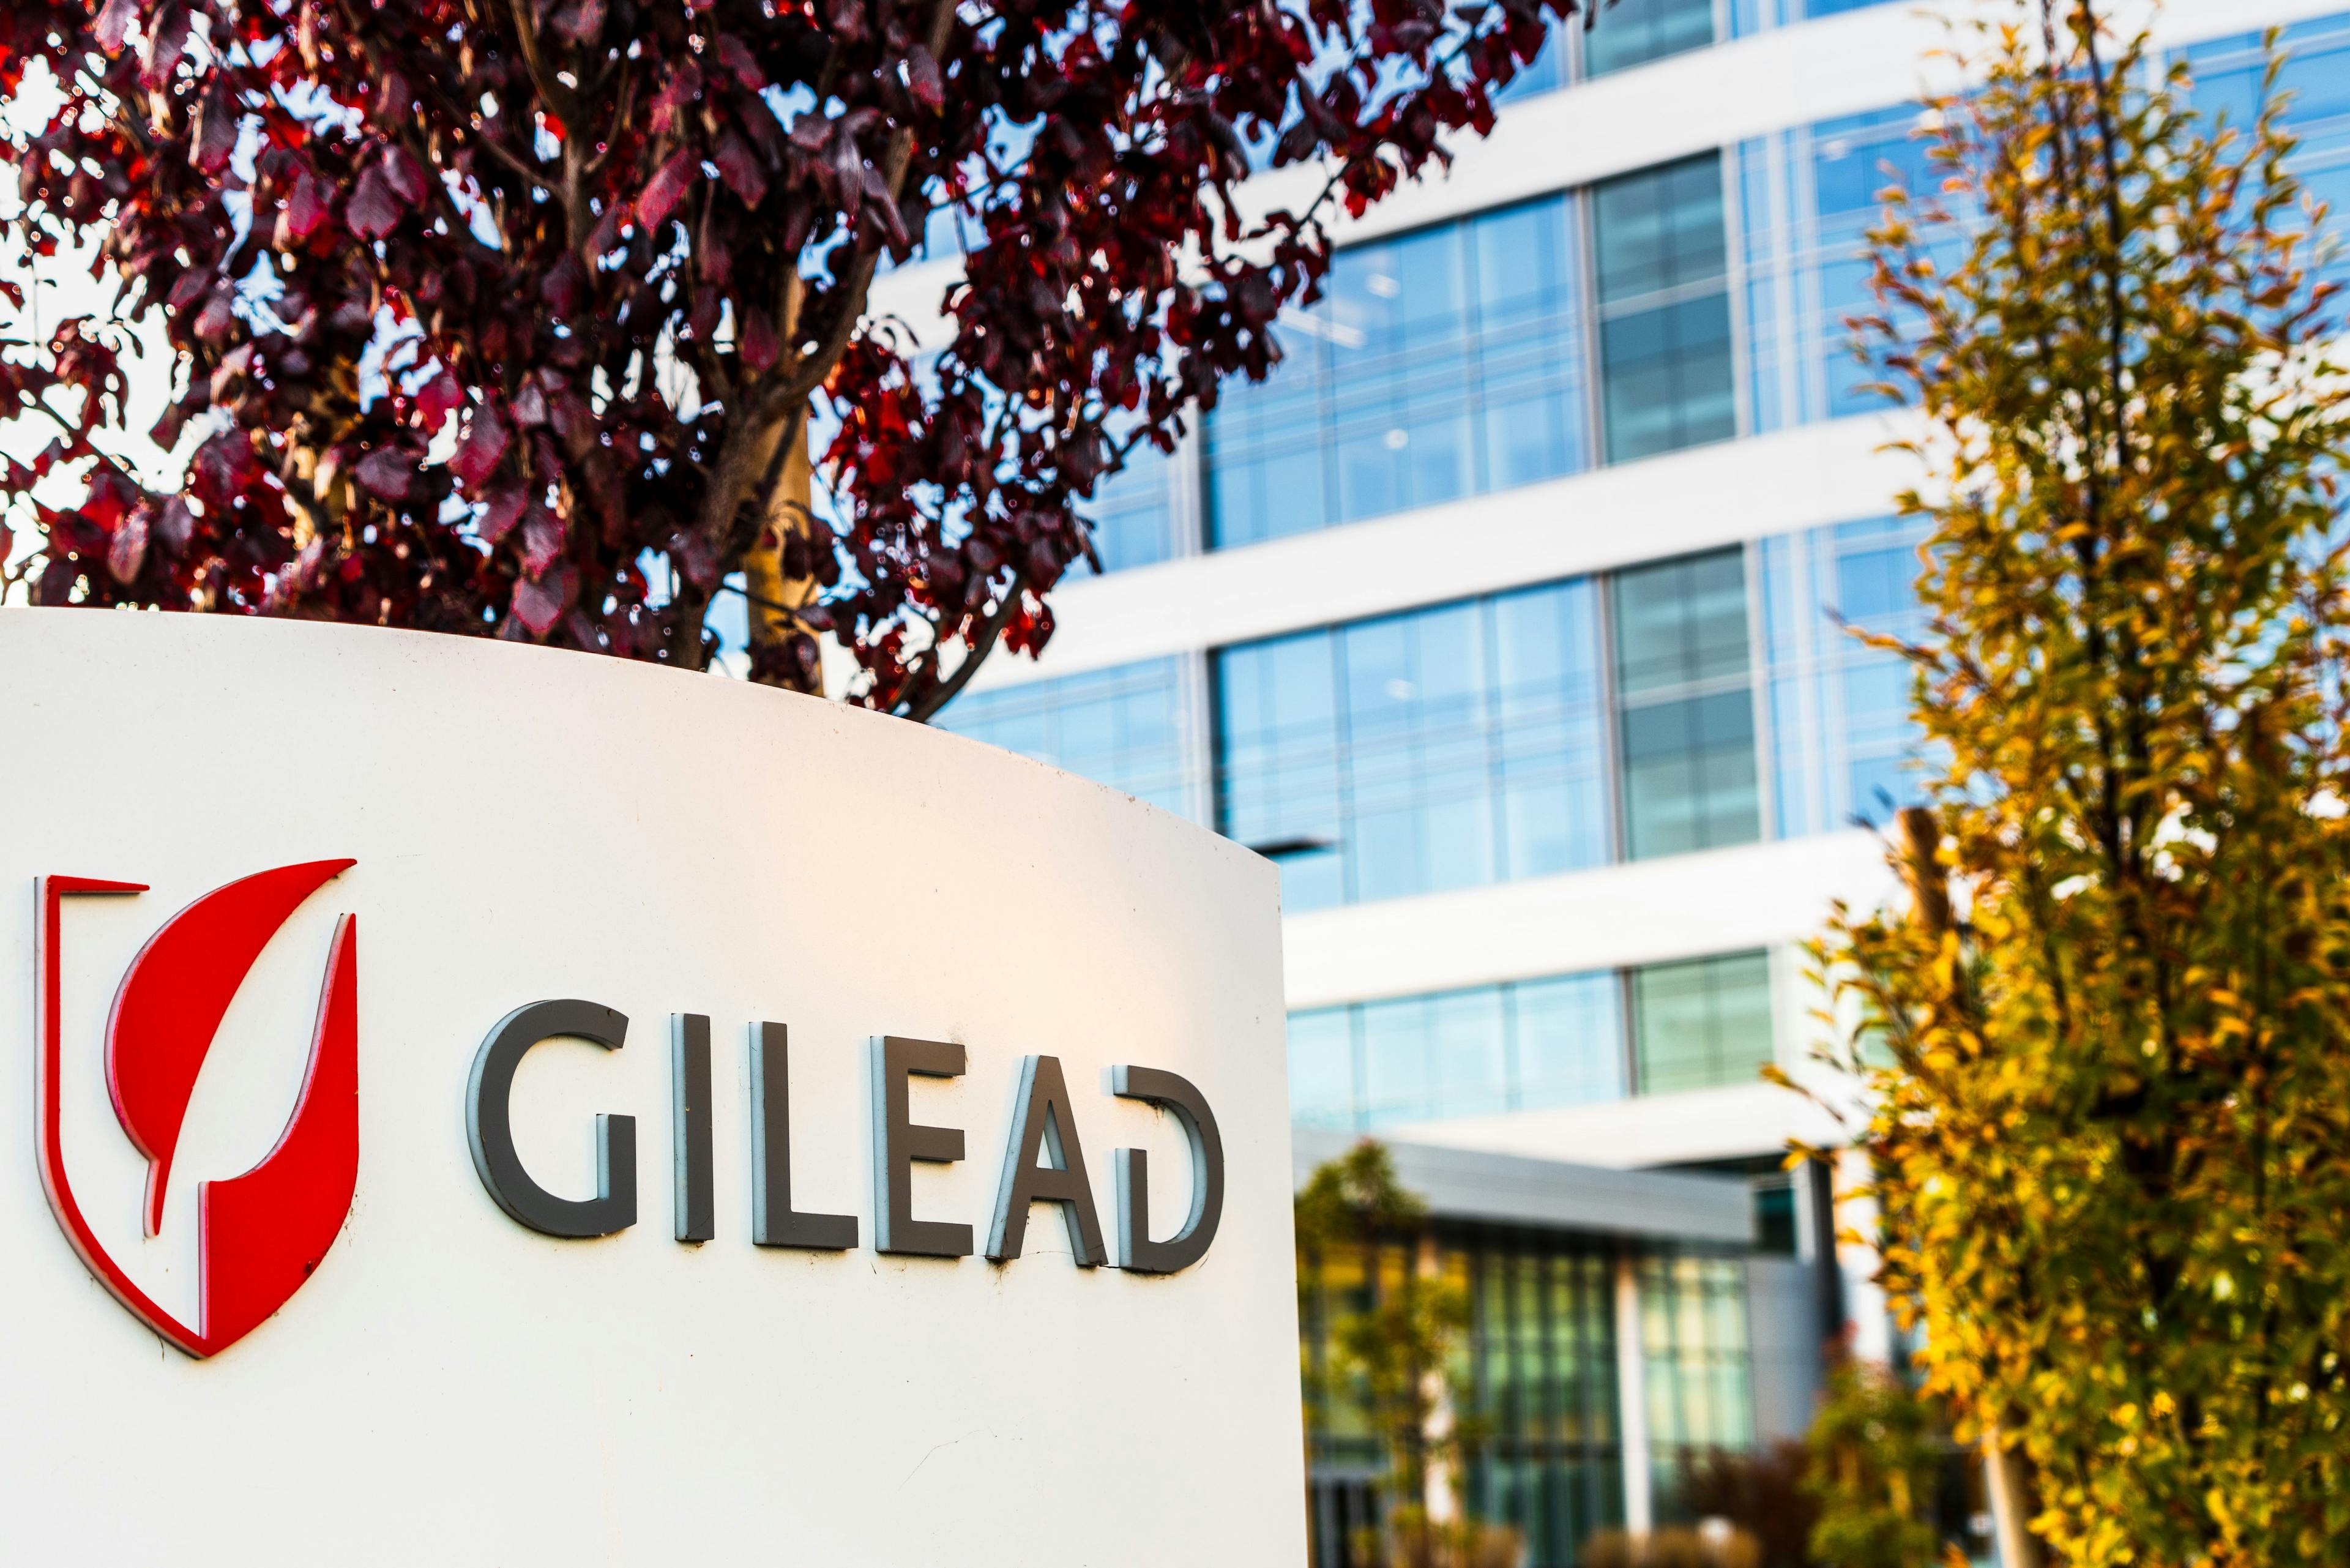 Image credit: Sundry Photography | stock.adobe.com. Nov 23, 2019 Foster City / CA / USA - Gilead headquarters in Silicon Valley; Gilead Sciences, Inc. is an American biotechnology company that researches, develops and commercializes drugs